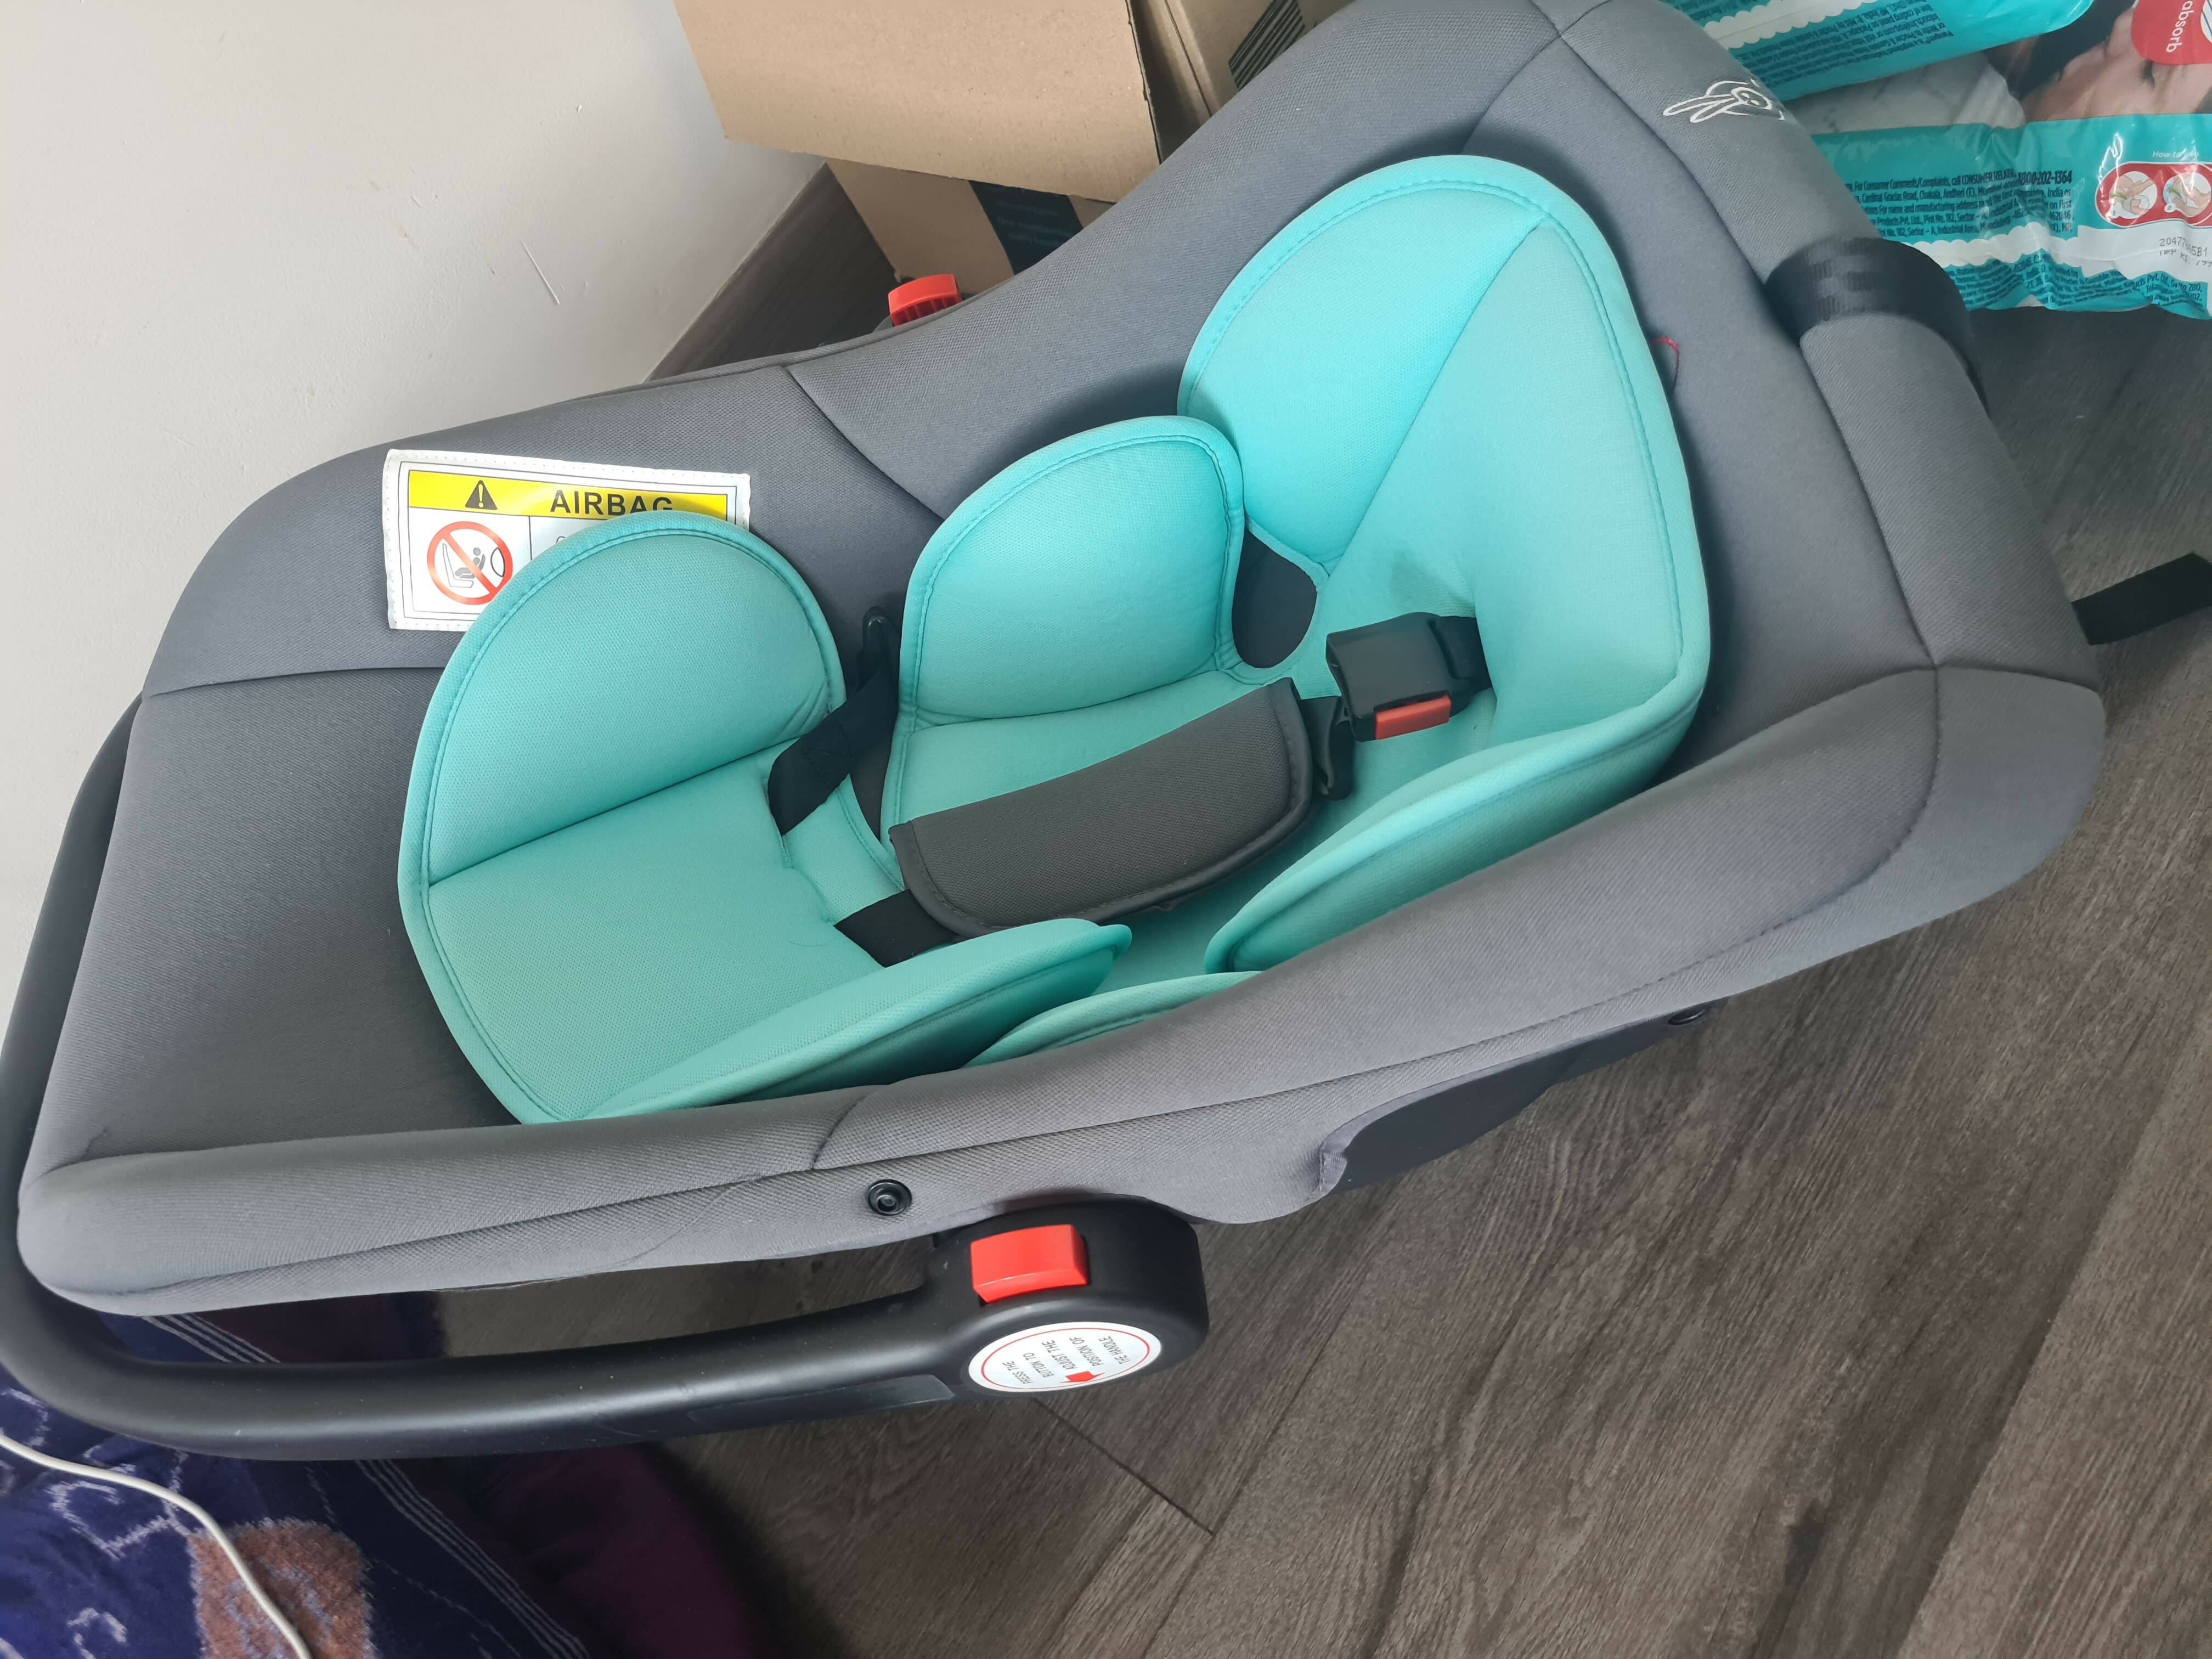 R FOR RABBIT Picaboo Car Seat cum carry cot